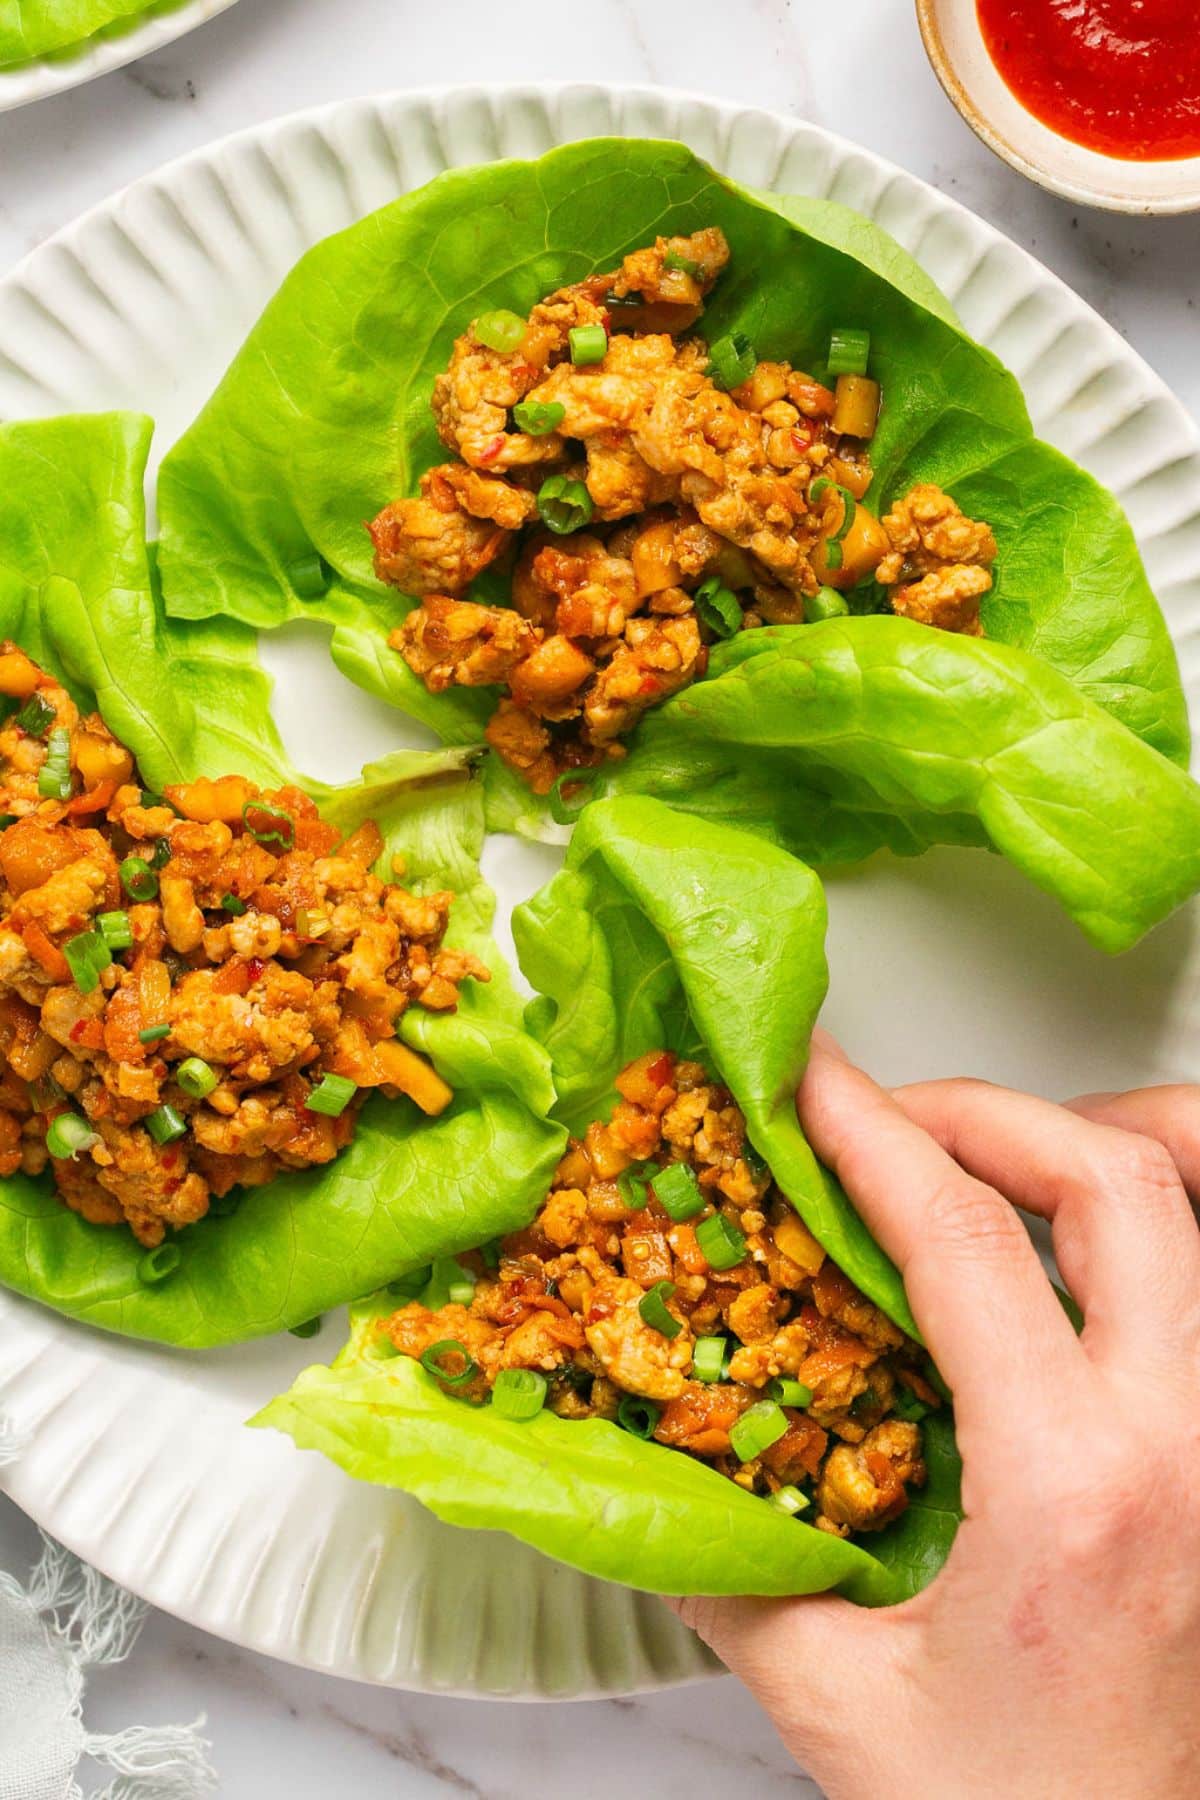 A hand reaching into grab a healthy chicken lettuce wrap from a plate on the table.